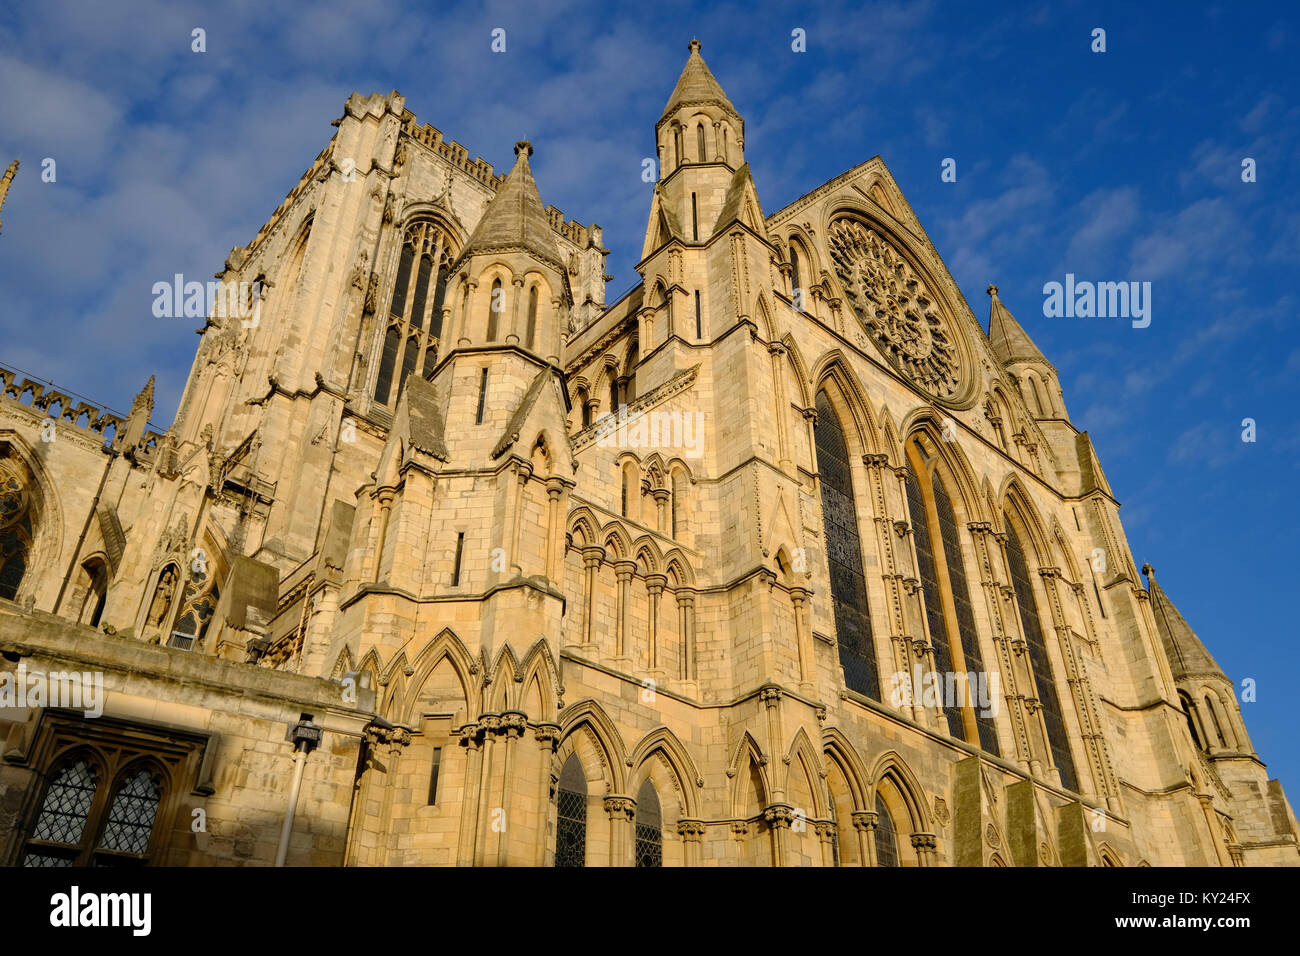 The ornate South Transept elevation of York Minster against a blue sky. Stock Photo